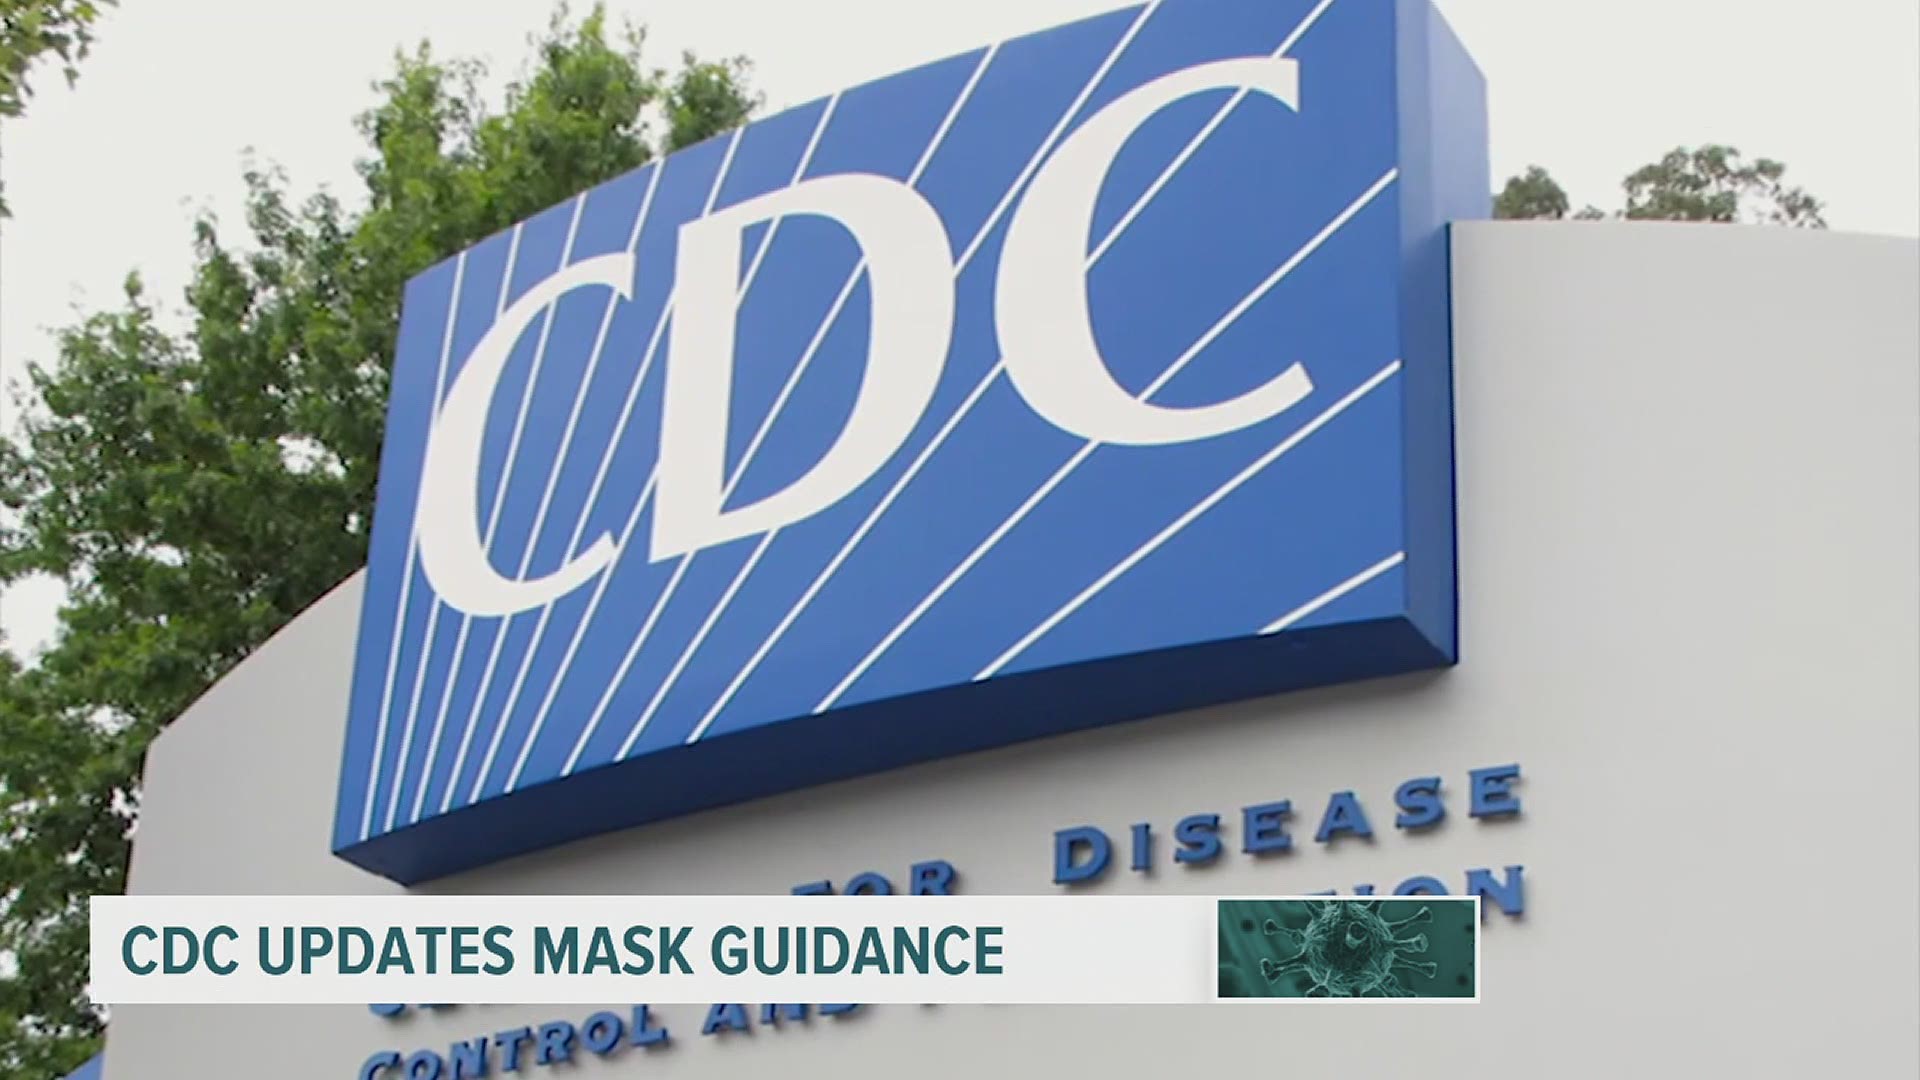 In more than 2,000 US counties where COVID cases are surging, the CDC now says even vaccinated people should return to wearing masks indoors.